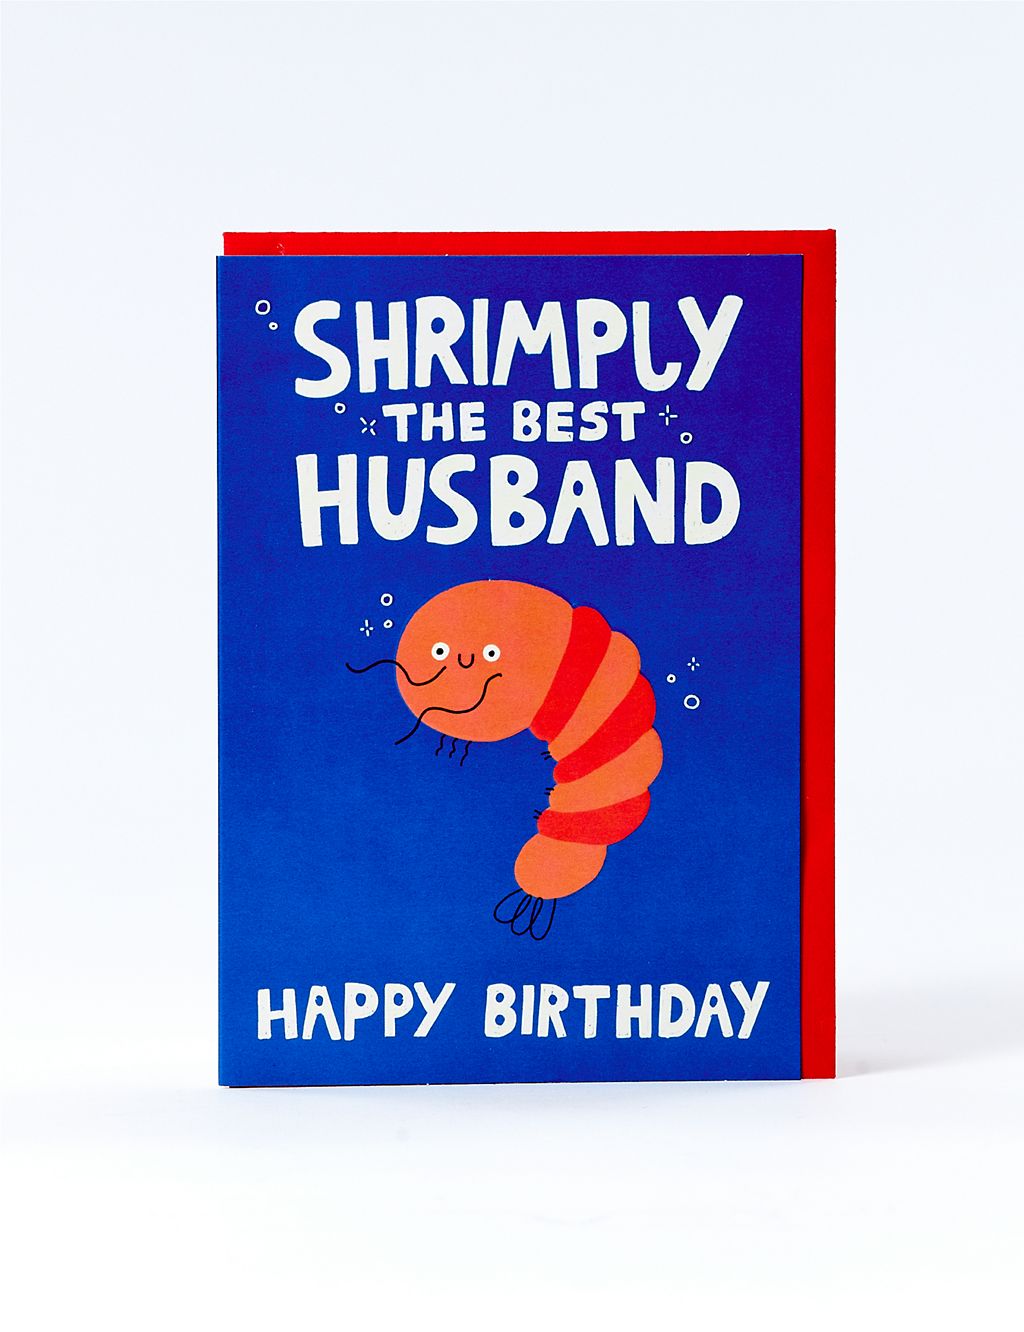 Husband Shrimp-ly The Best Birthday Card 1 of 1